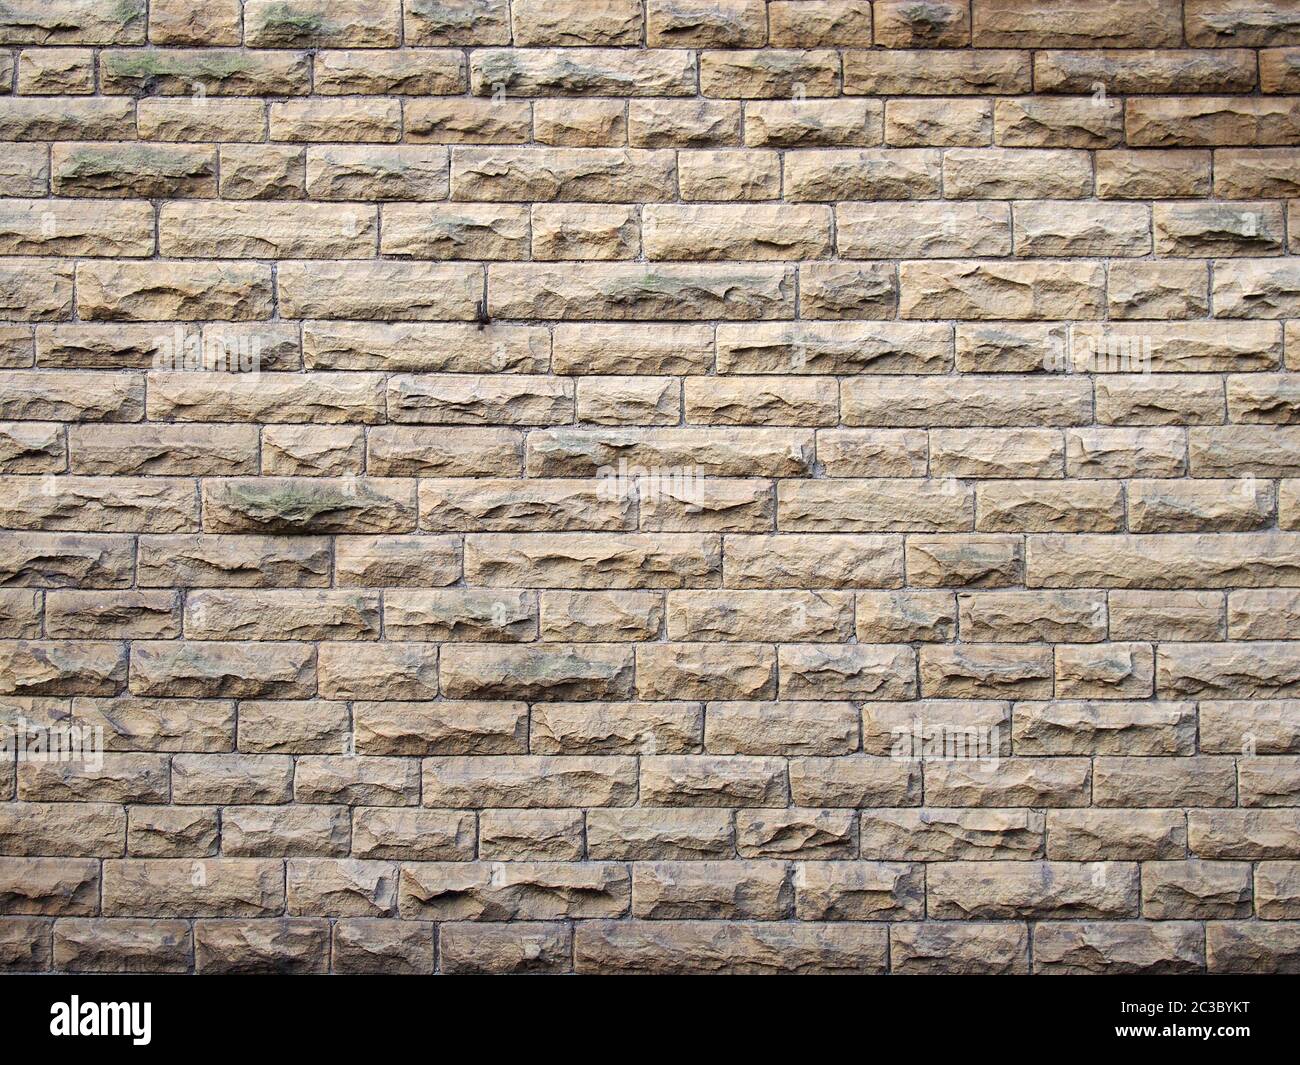 a full frame image of an old yellow sandstone wall made of regular blocks Stock Photo